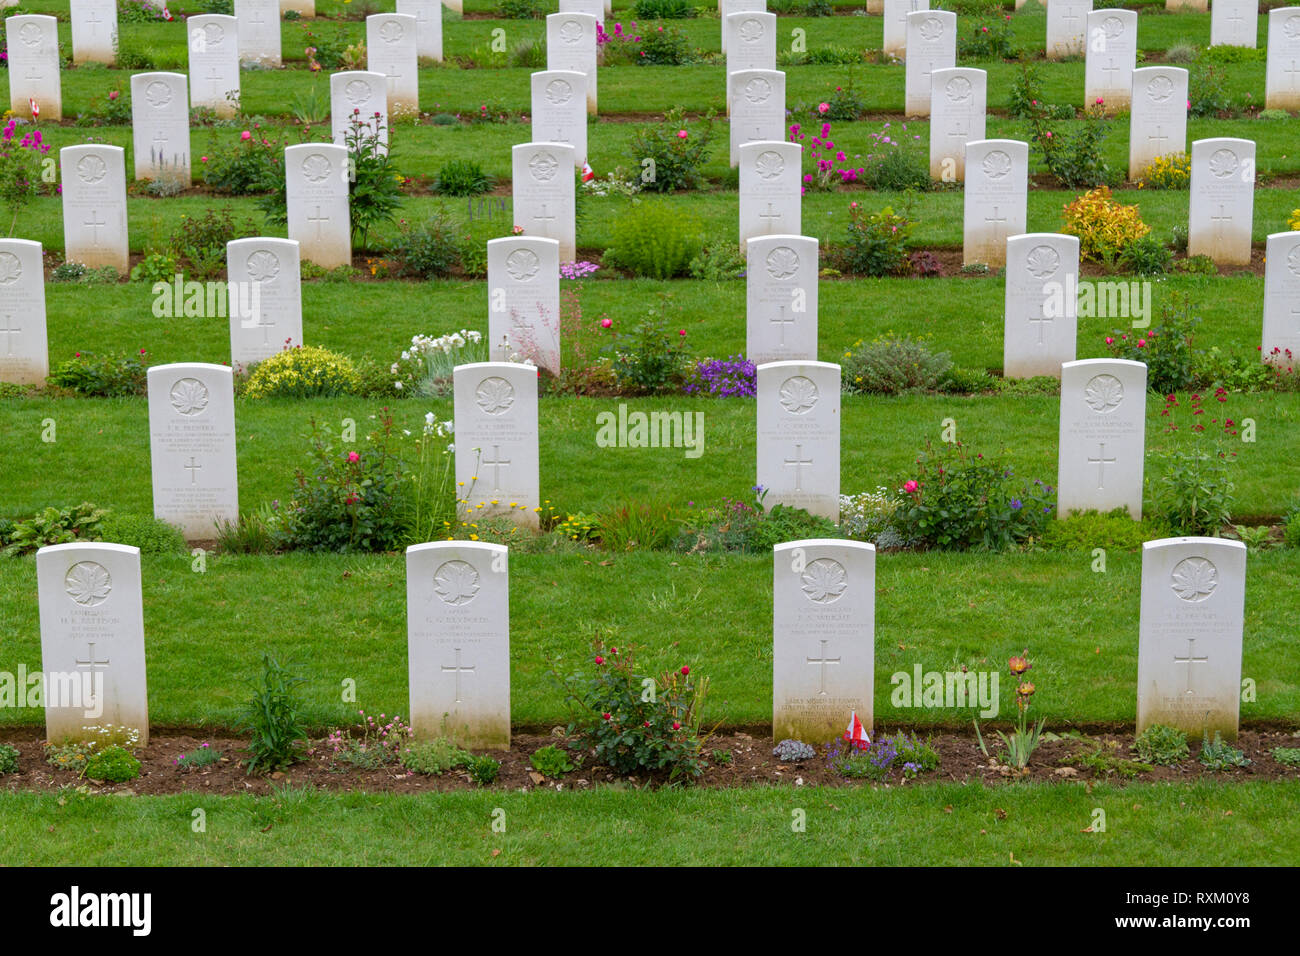 Headstones in the Beny-Sur-Mer Canadian Commonwealth Cemetery, near Courseulles-sur-Mer, Normandy, France. Stock Photo